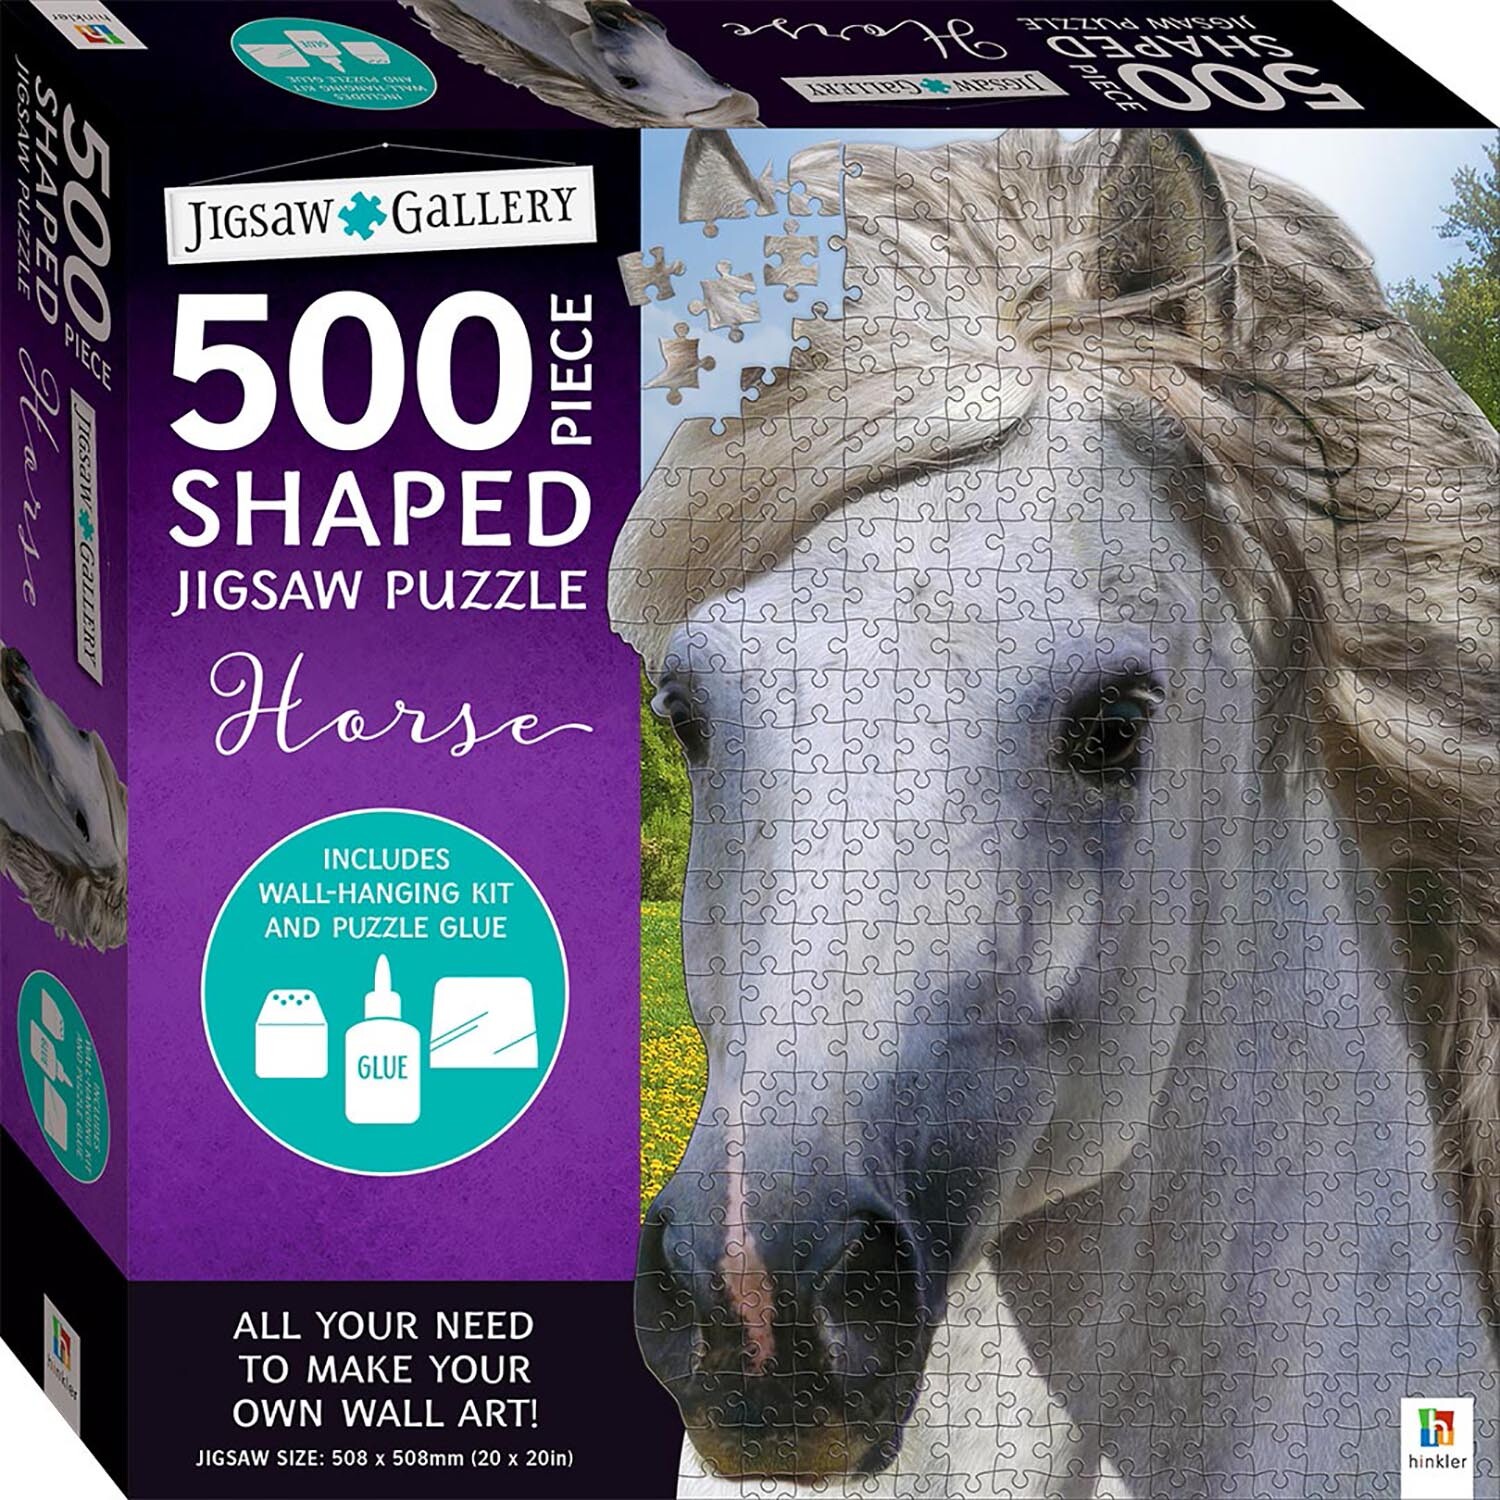 Hinkler Jigsaw Gallery Horse Jigsaw Puzzle 500 Piece Image